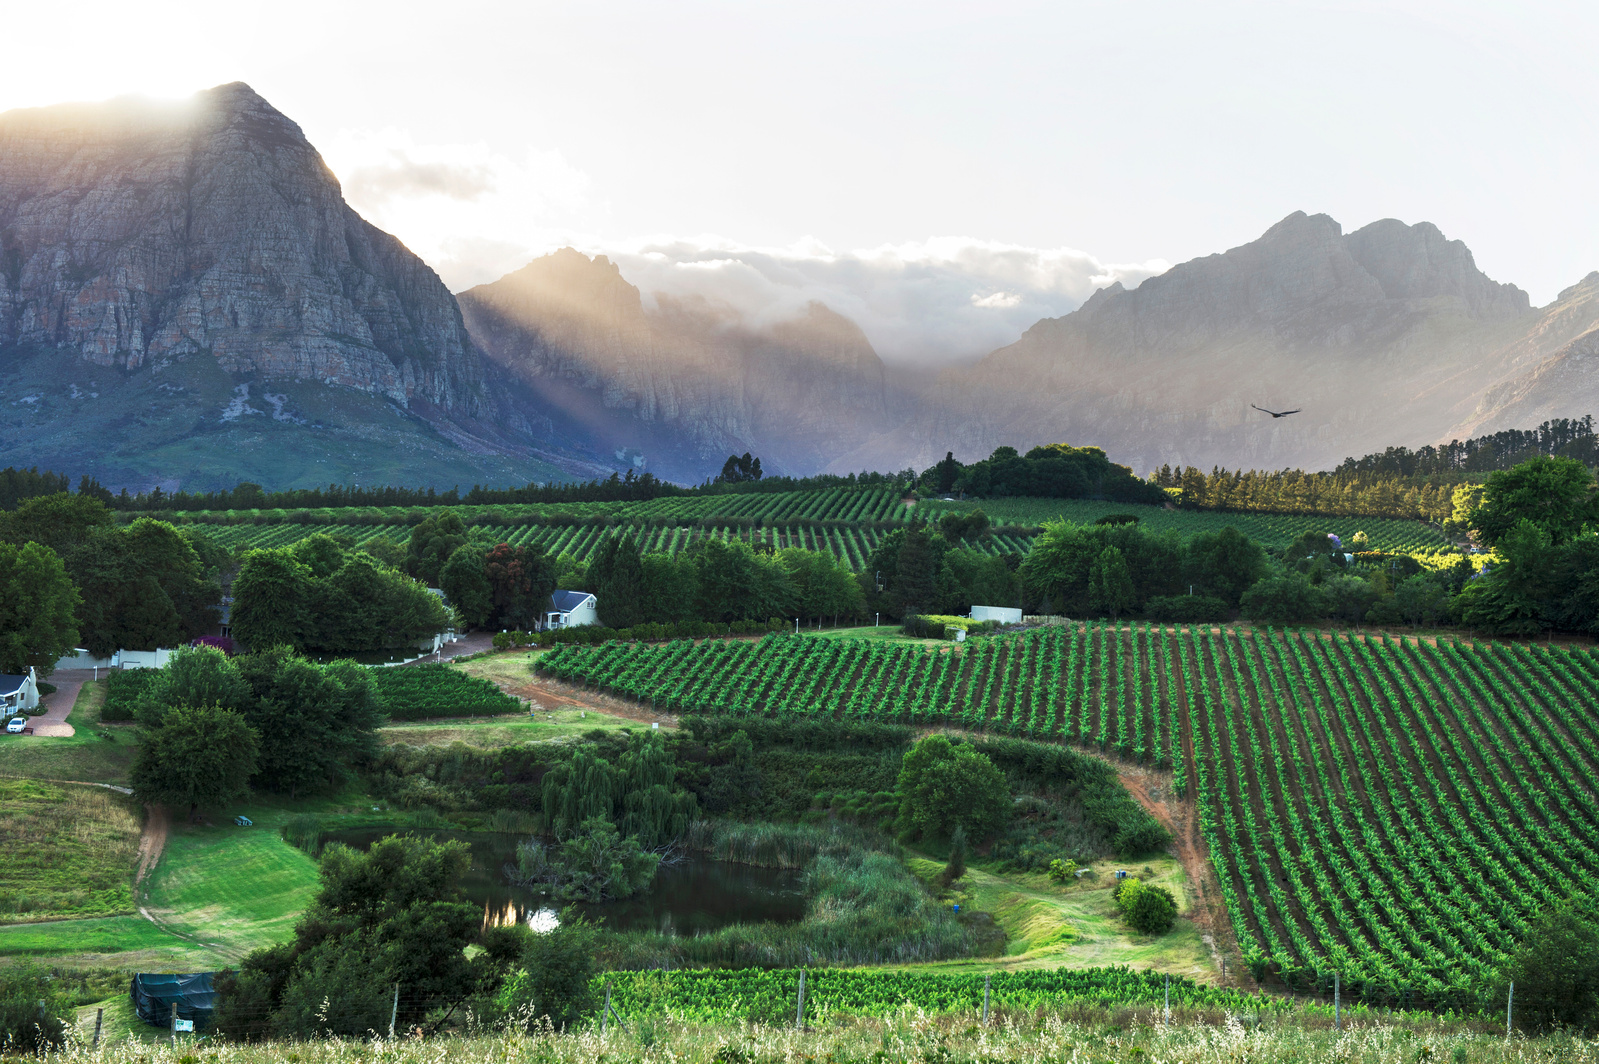 The sun rising over the mountains in Stellenbosch, a wine region in South Africa.